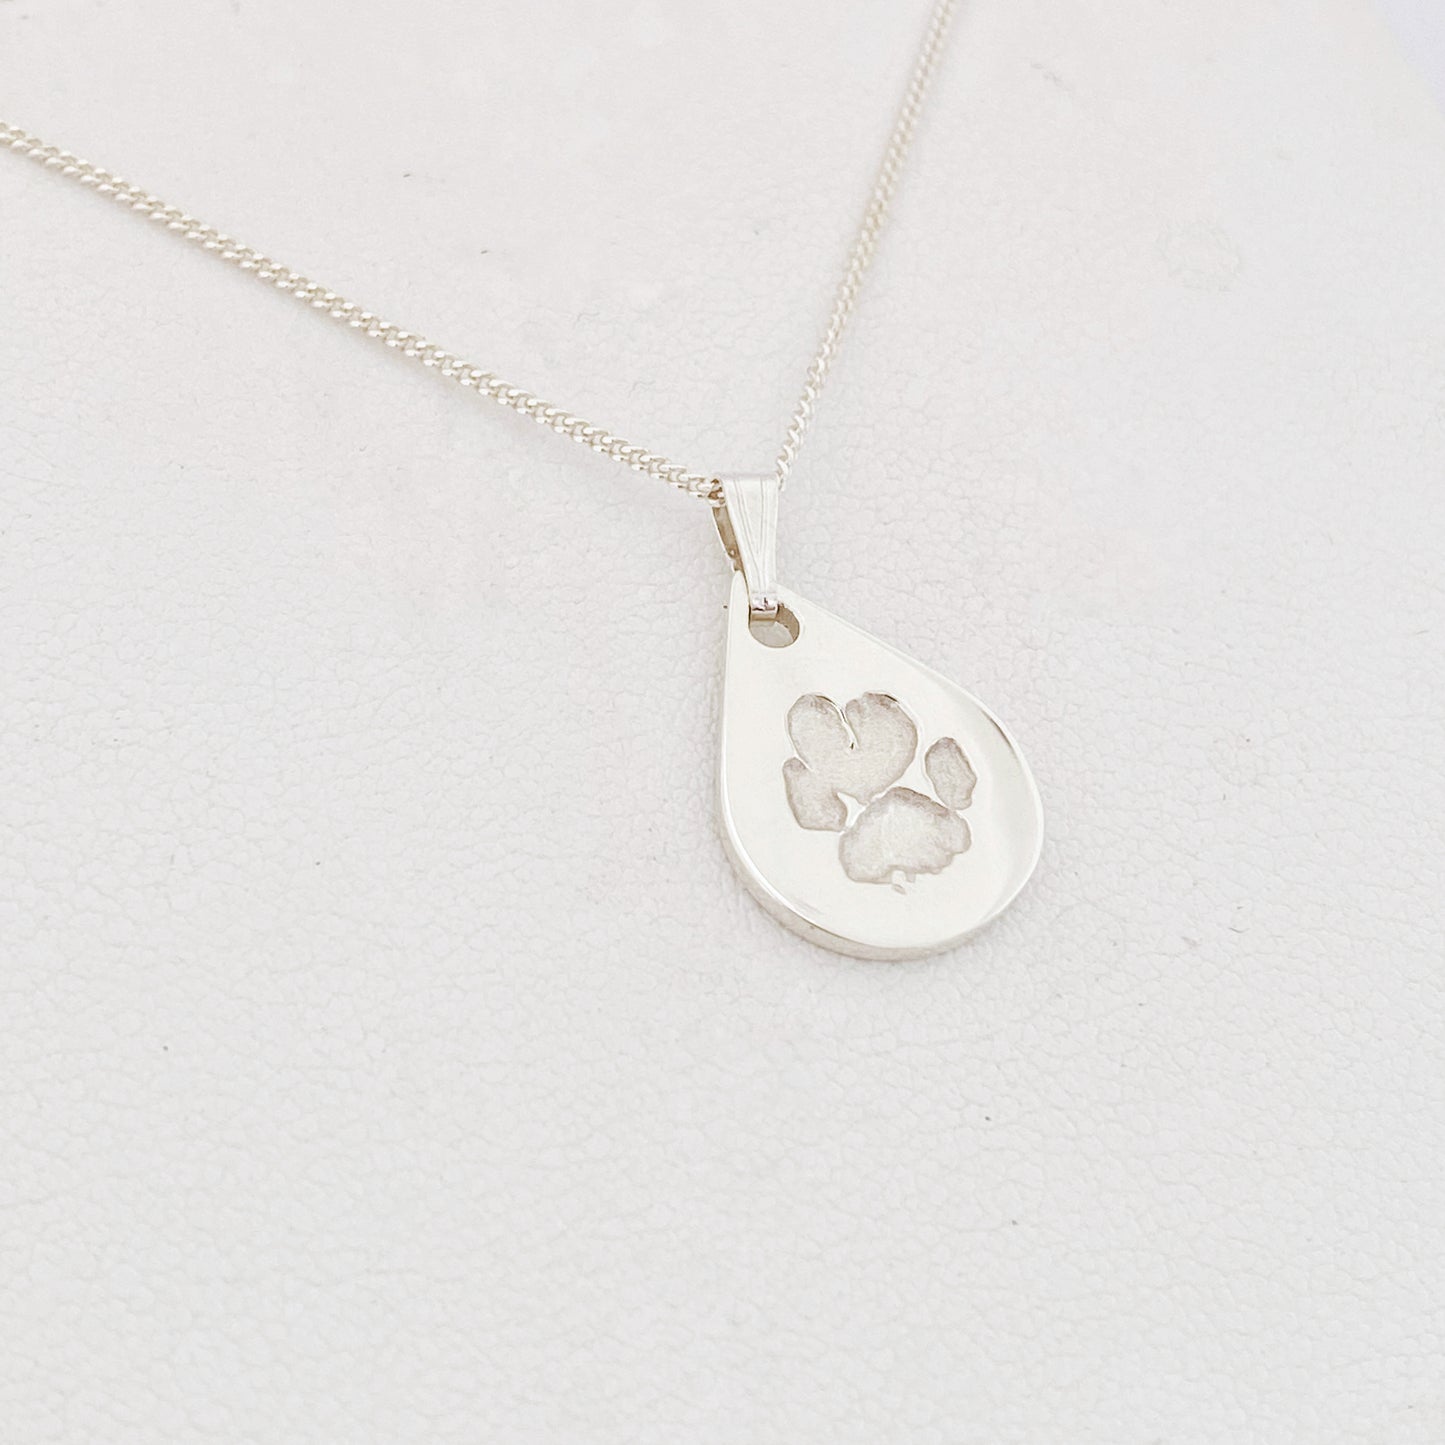 Paw Print Pendant, Mini Print of your actual pets paw print in sterling silver or gold